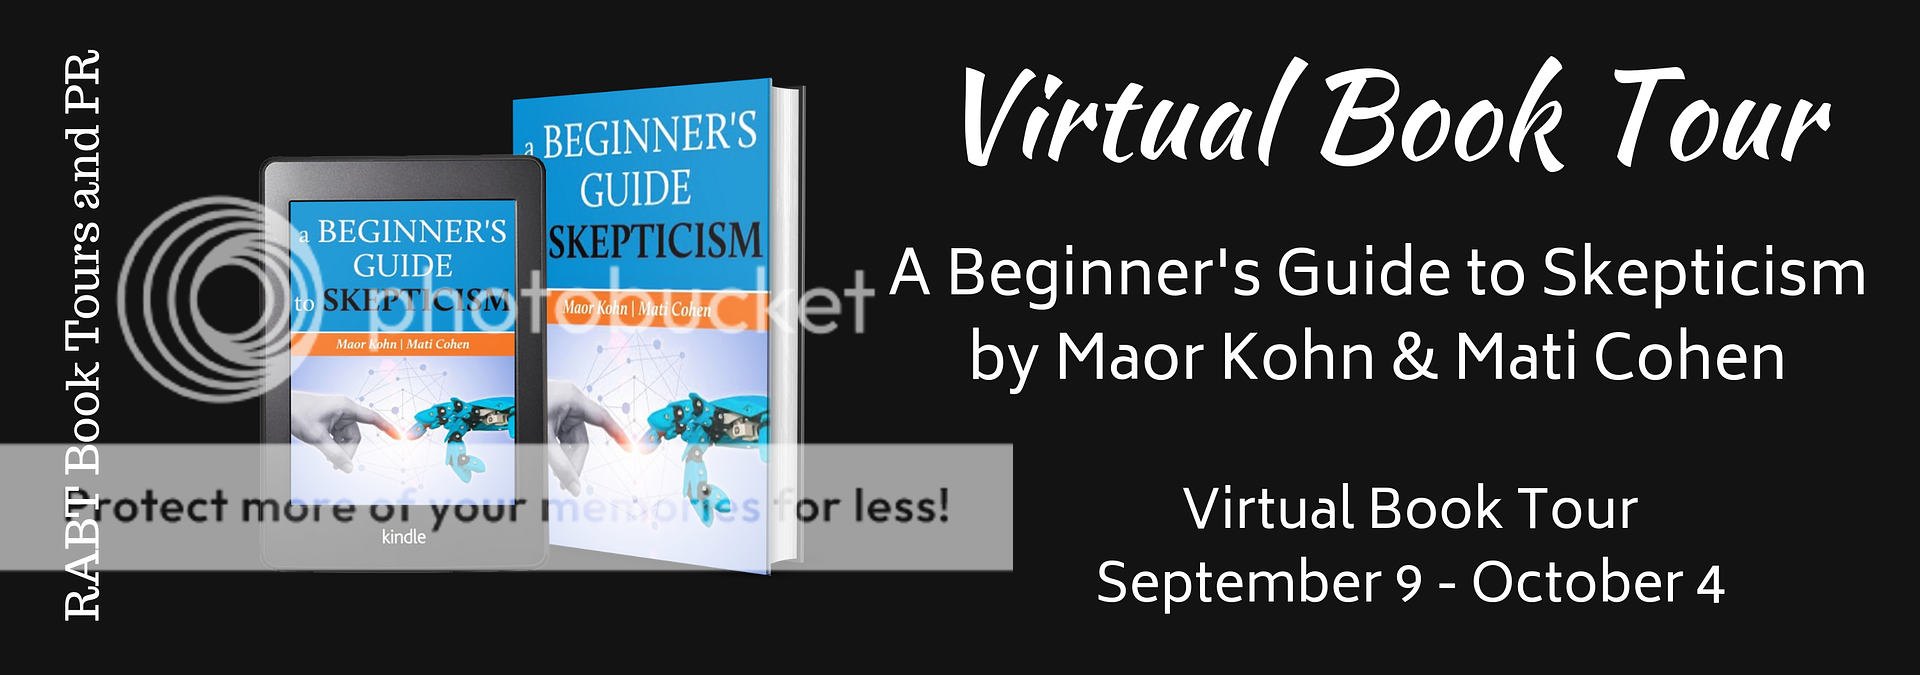 Virtual Book Tour: A Beginner's Guide to Skepticism by Maor Kohn & Mati Cohen #interview #blogtour #popolarscience #science @RABTBookTours